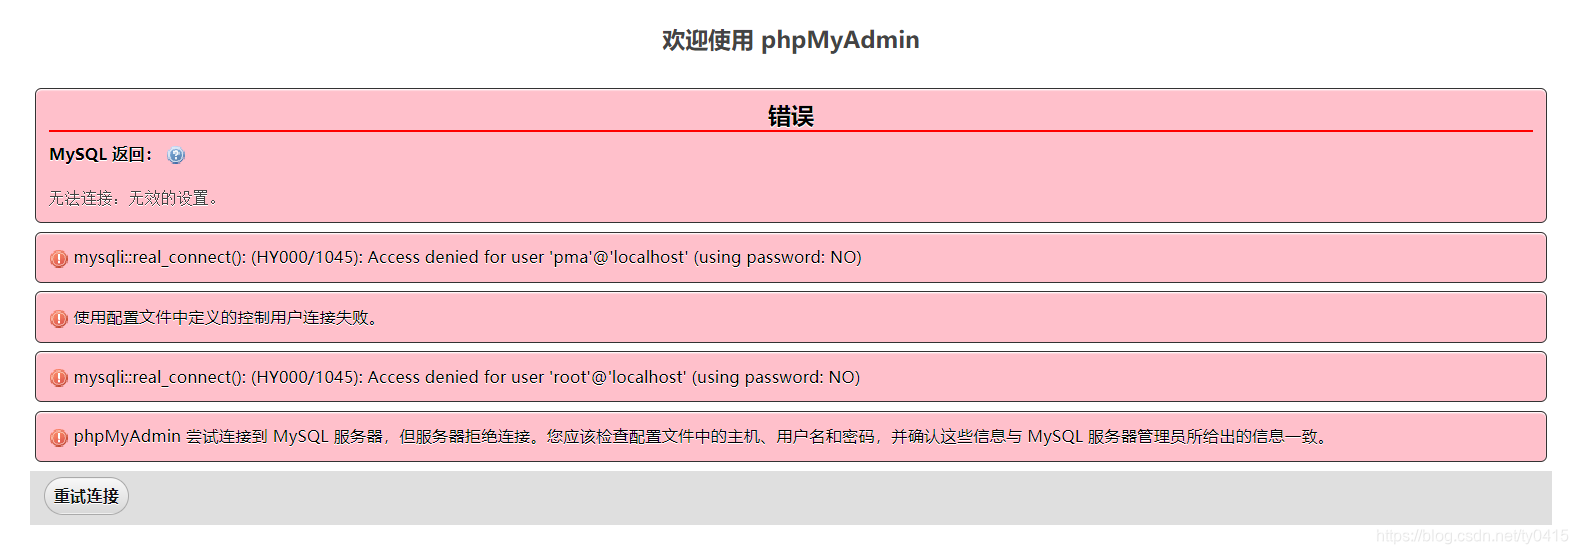 mysqli::real_connect(): (HY000/1045): Access denied for user ‘pma‘@‘localhost‘ (using password: NO)